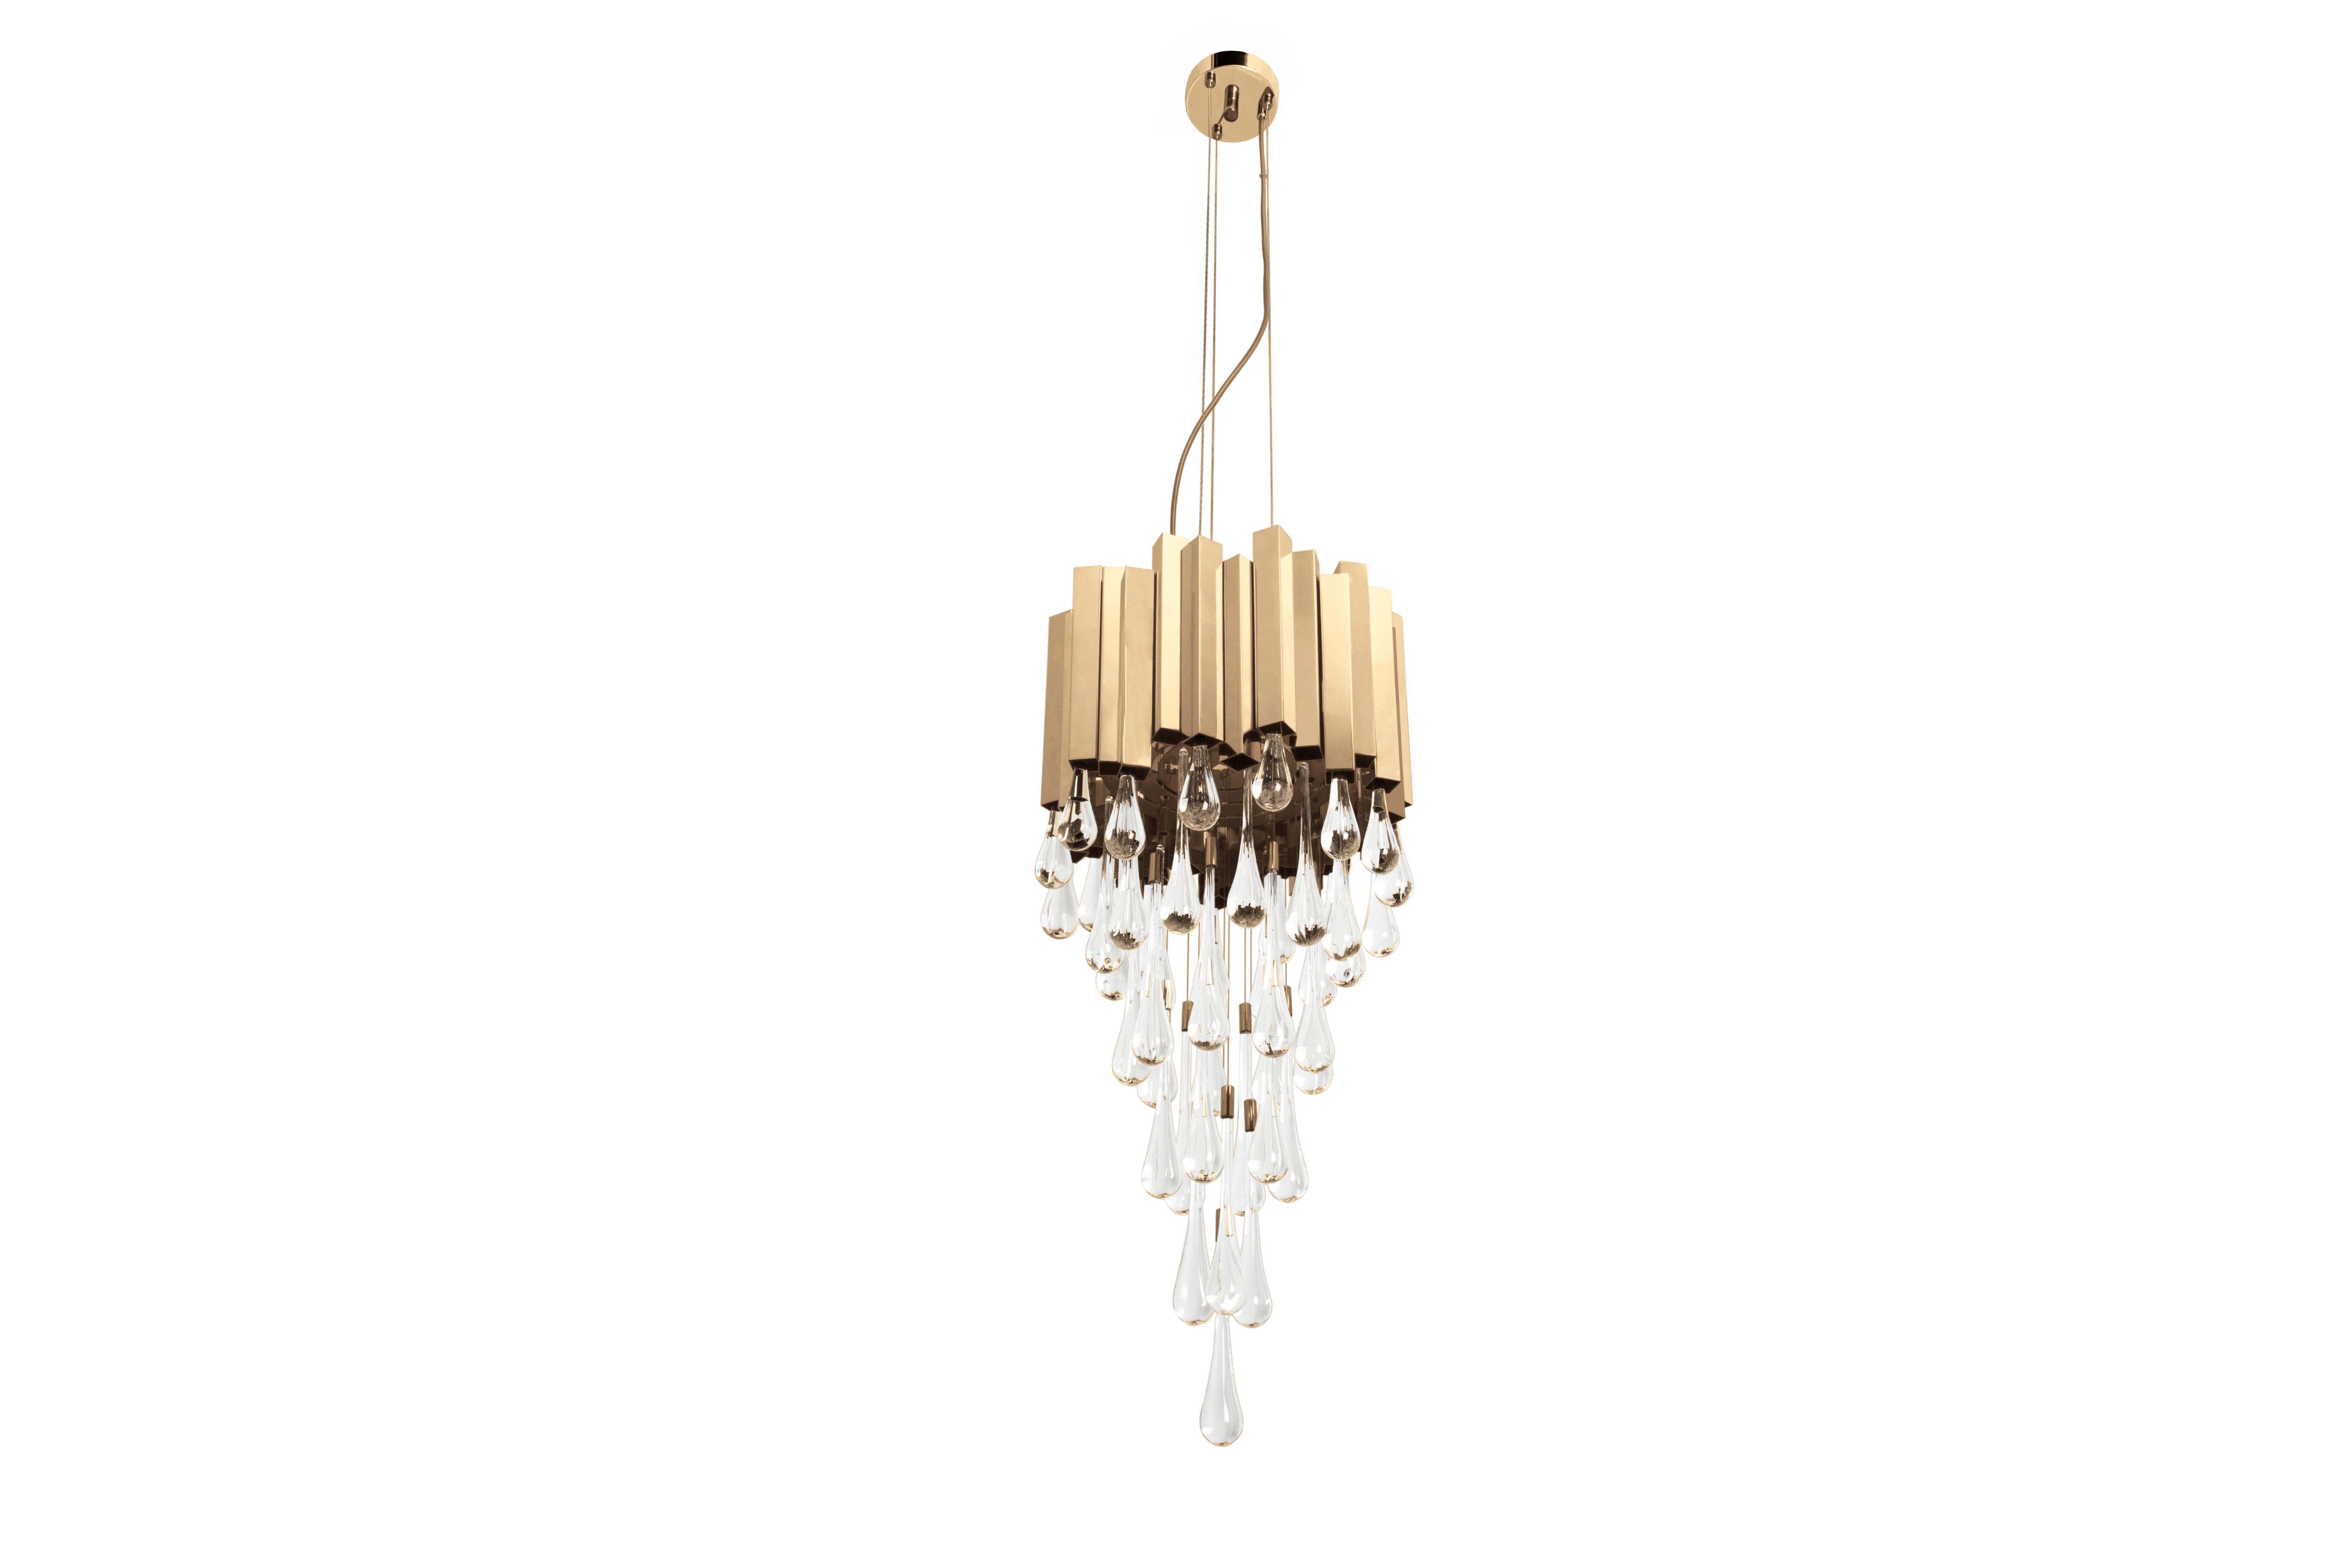 Impetuous in its form, the confidence of the asymmetric stripes in gold plated brass and the sublime tears of crystal glass, make this classic contemporary design a true dash pendant of Trump.

MATERIALS
Body: Brass & Crystal Glass

STANDARD